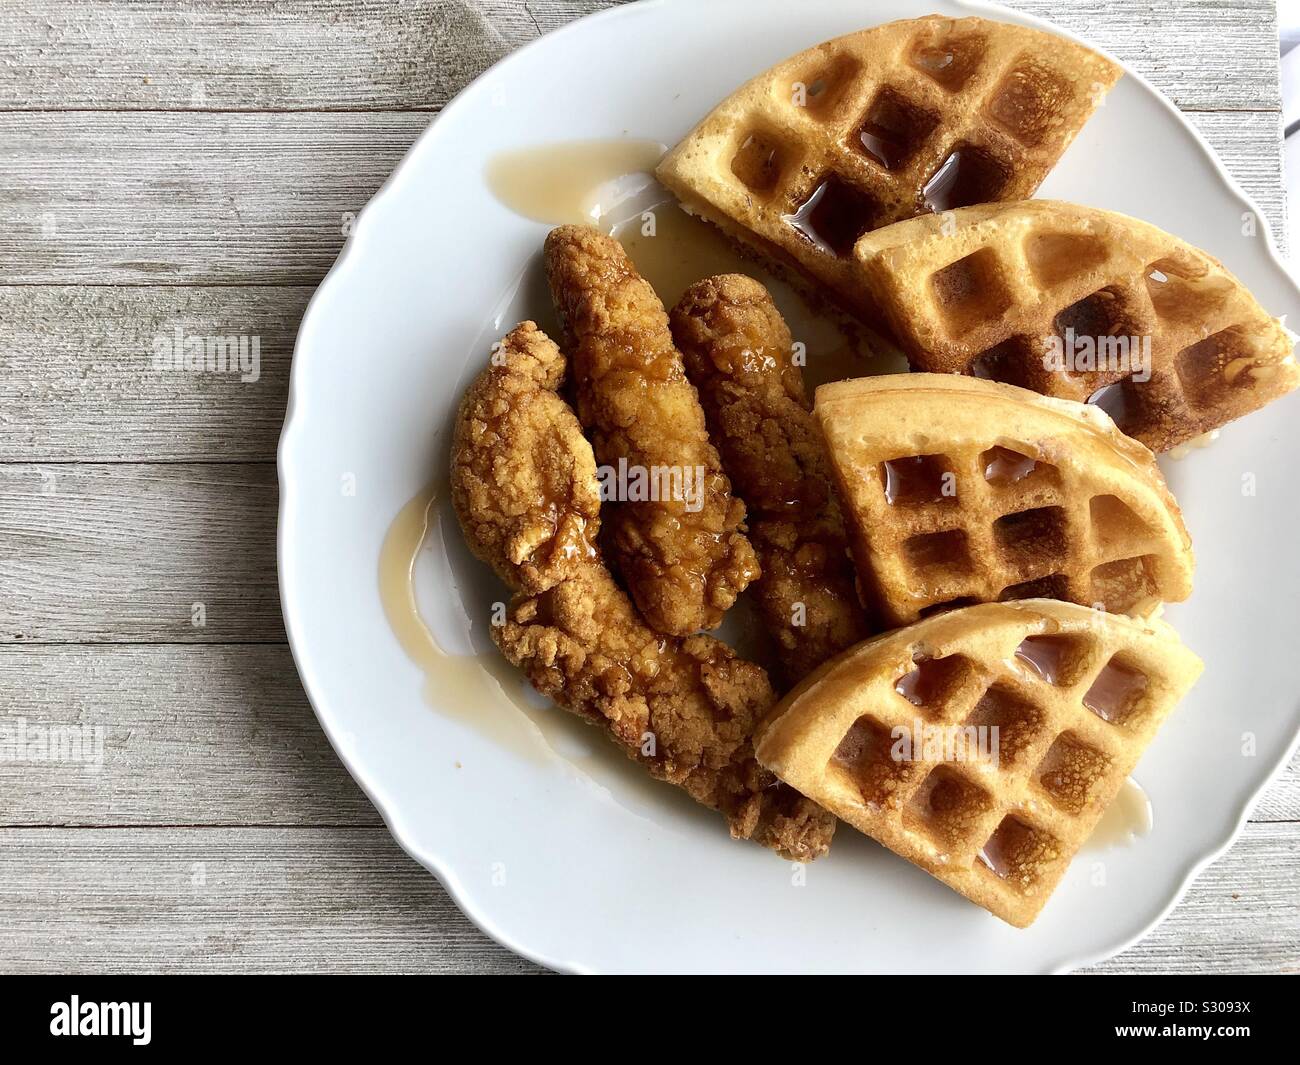 Chicken and waffles Stock Photo